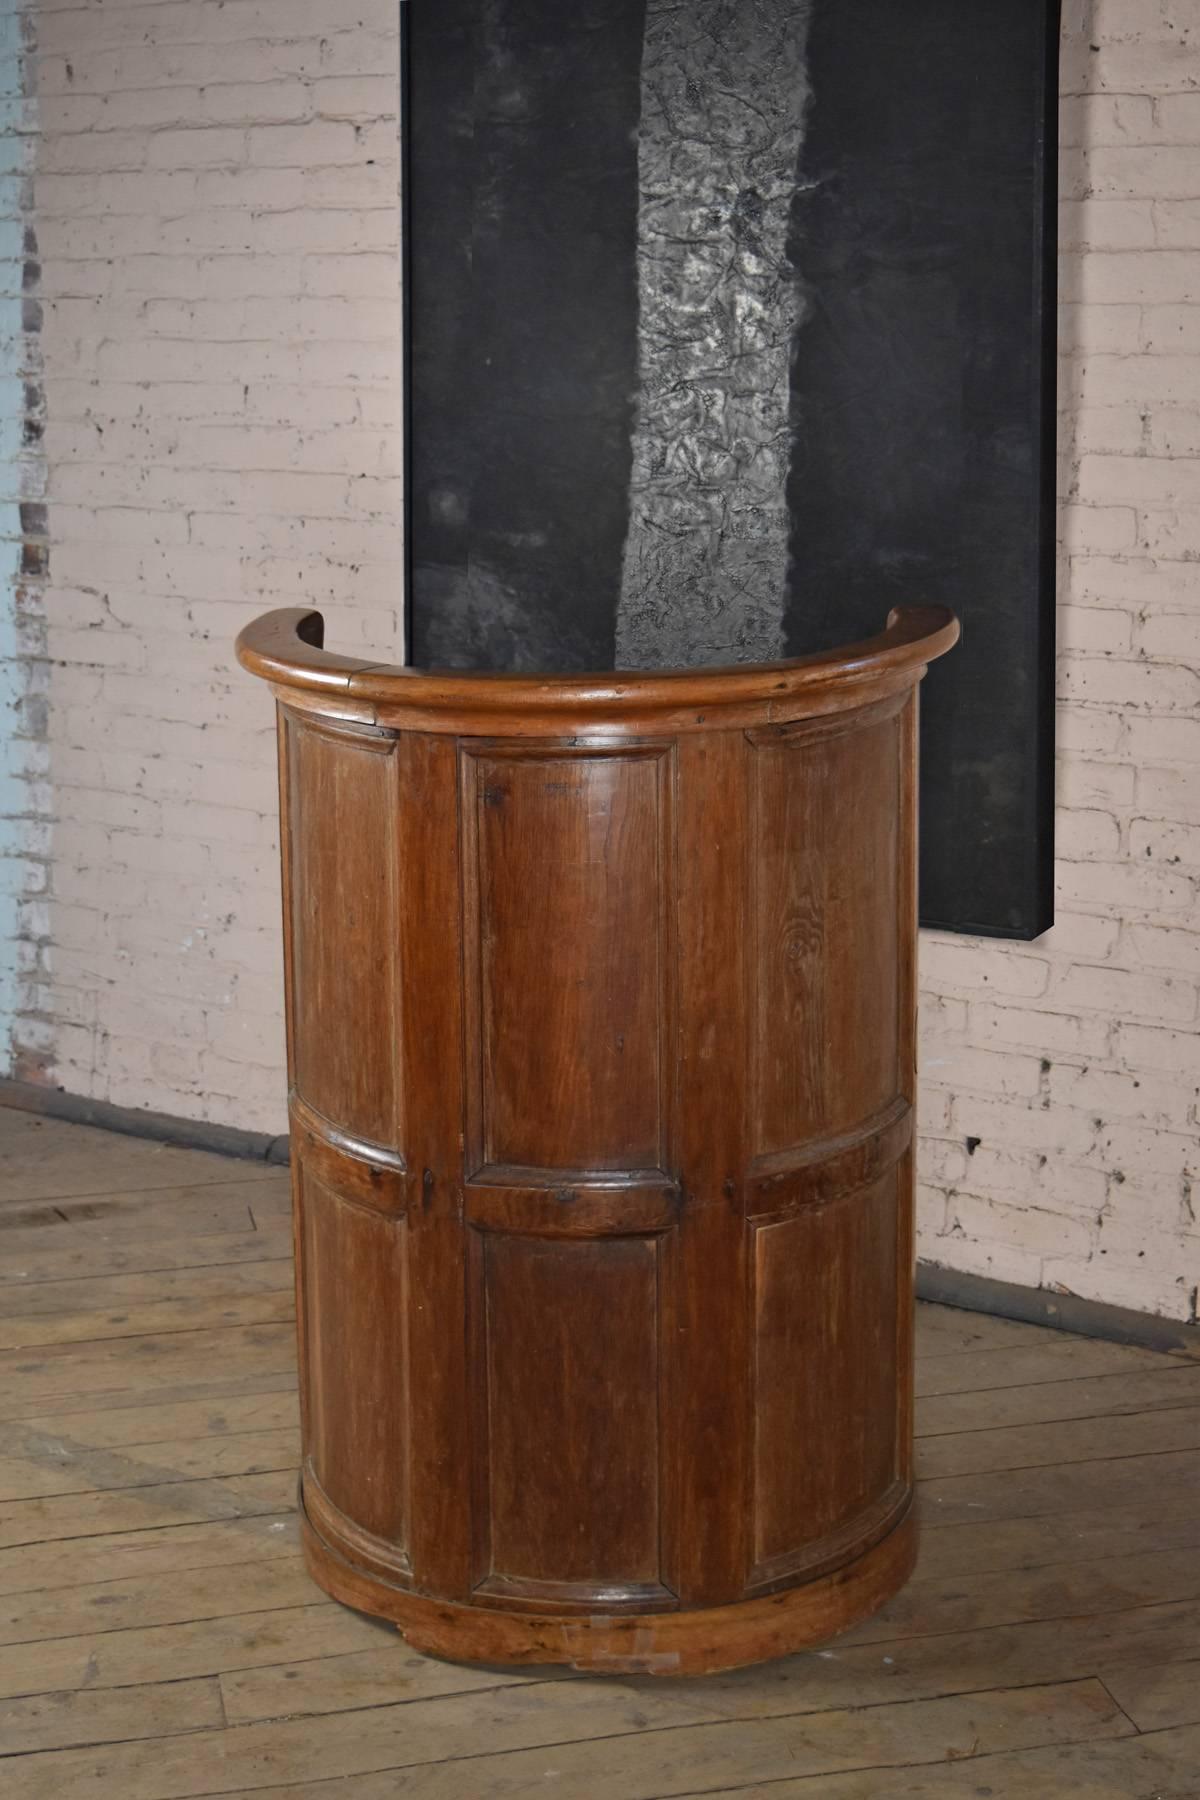 Renaissance French 16th Century early Baroque Oak Barrel-Back Seat For Sale